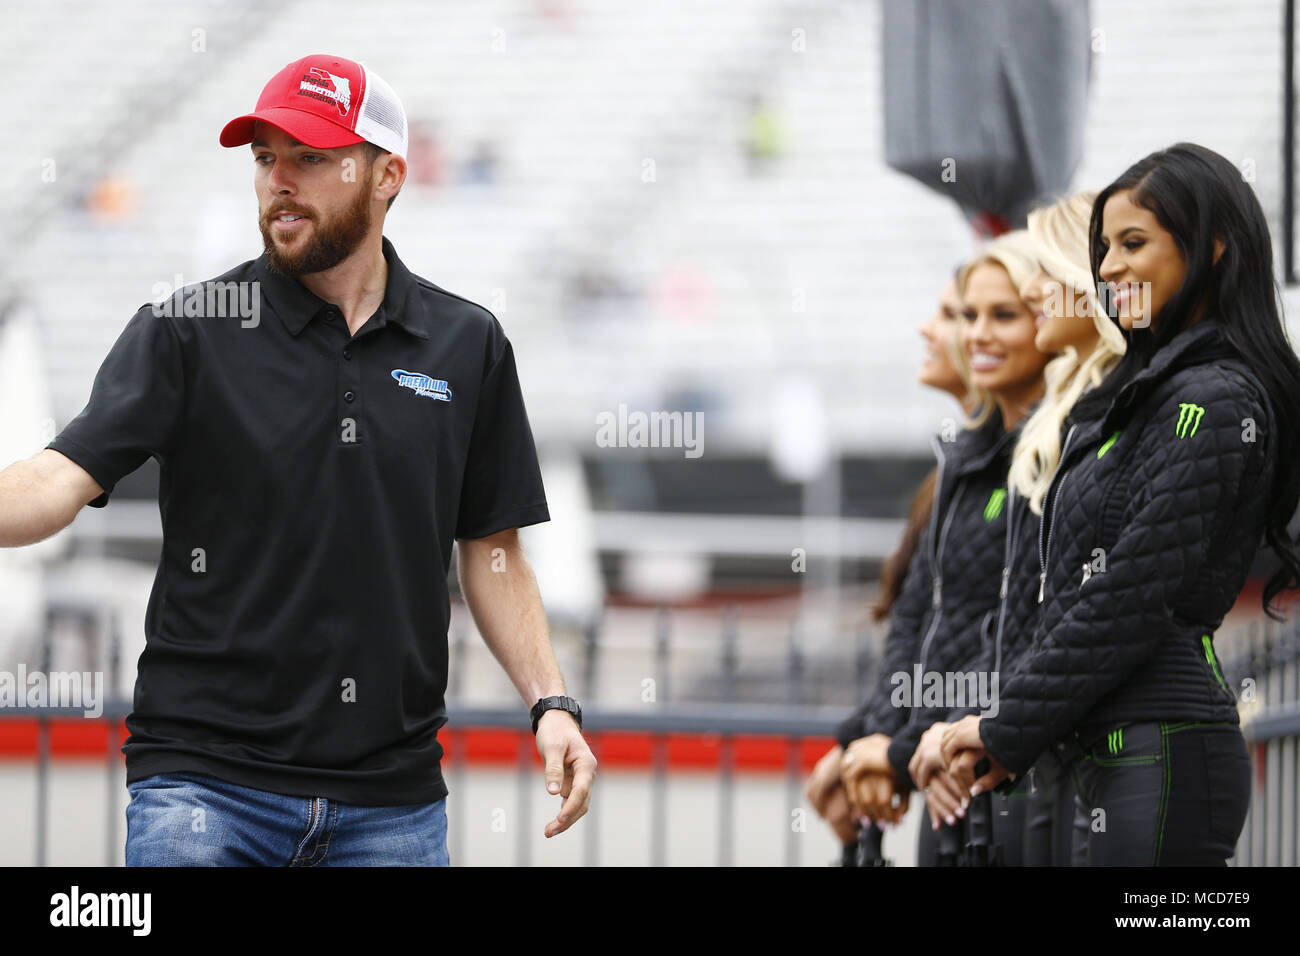 Bristol, Tennessee, USA. 15th Apr, 2018. April 15, 2018 - Bristol, Tennessee, USA: Ross Chastain (15) is introduced to the crowd before racing in the Food City 500 at Bristol Motor Speedway in Bristol, Tennessee. Credit: Chris Owens Asp Inc/ASP/ZUMA Wire/Alamy Live News Stock Photo